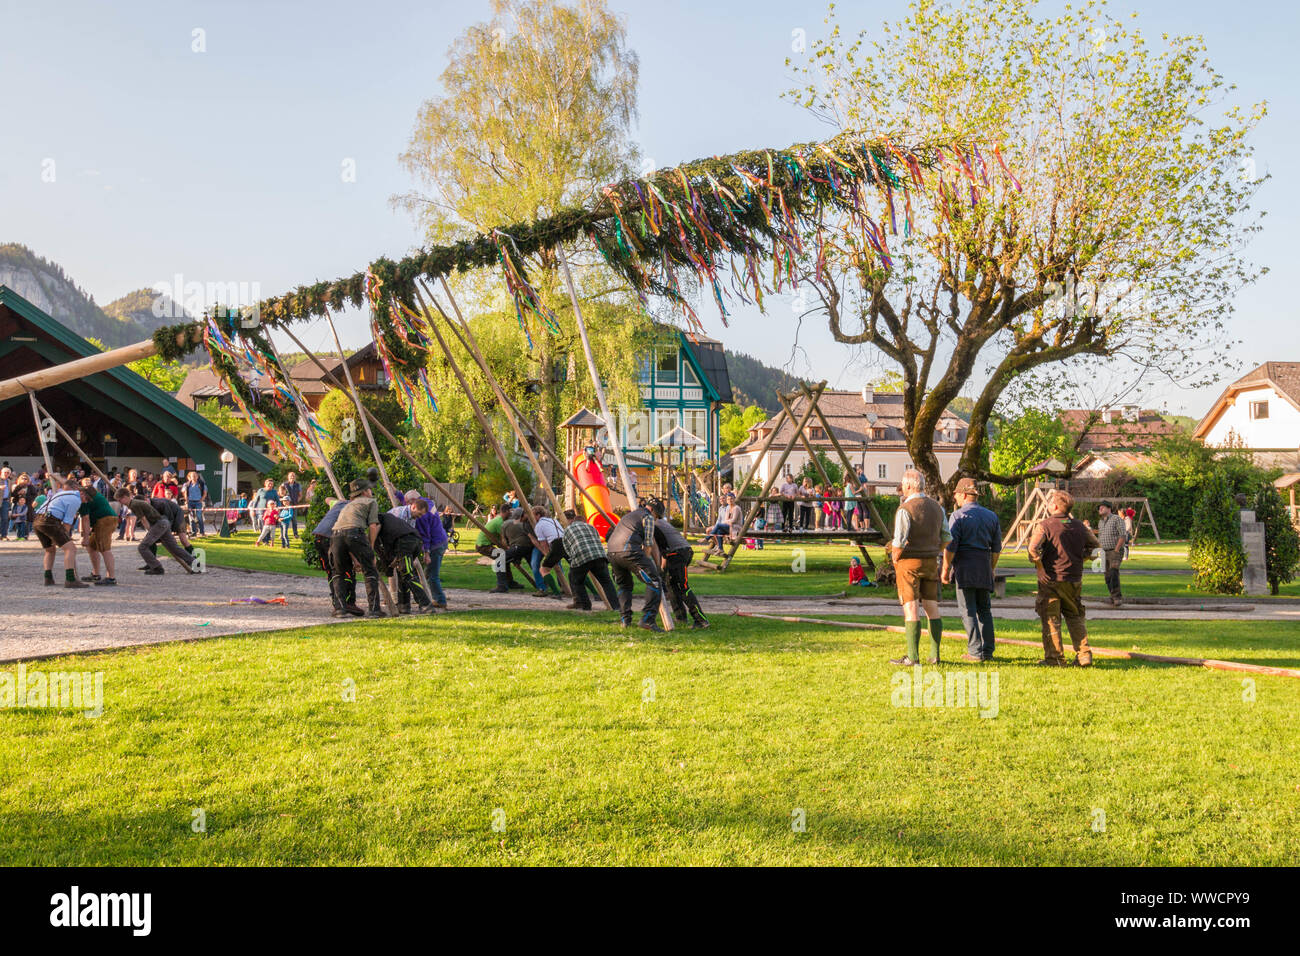 St.Gilgen, Austria - April 30, 2018: Traditional decorated maypole is being erected during folk festival in austrian  alpine village. Stock Photo